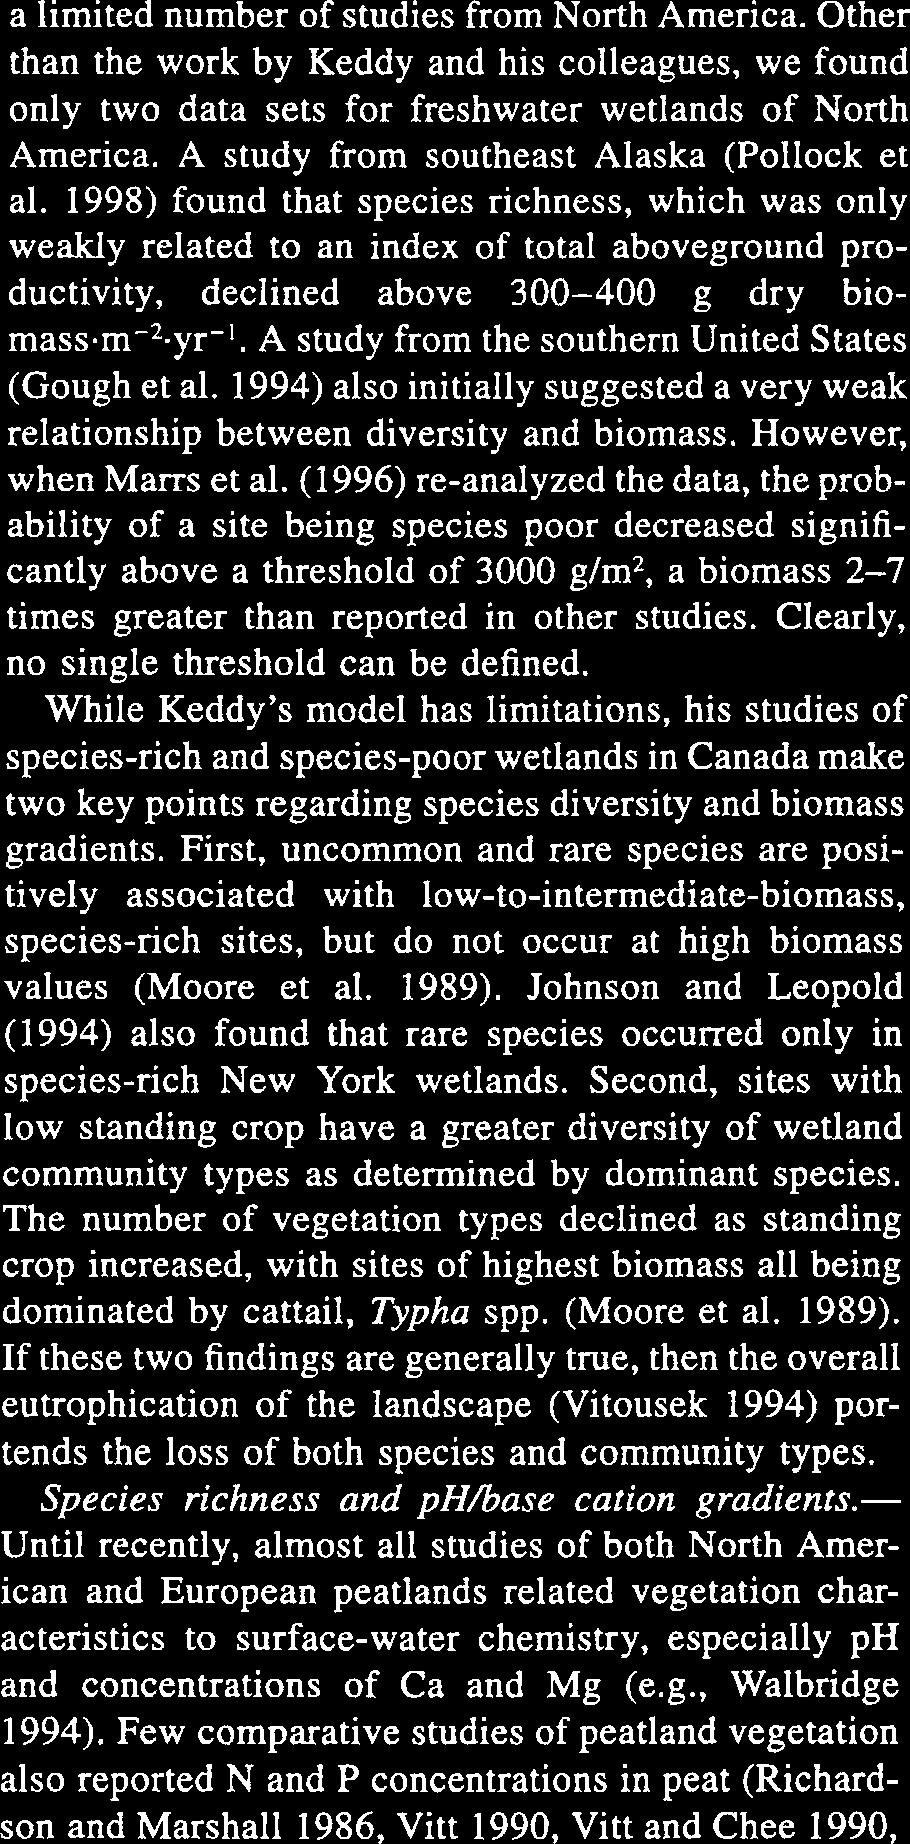 1998) found that species richness, which was only weakly related to an index of total aboveground productivity, declined above 300-400 g dry biorna~s.m-~.yr-l.